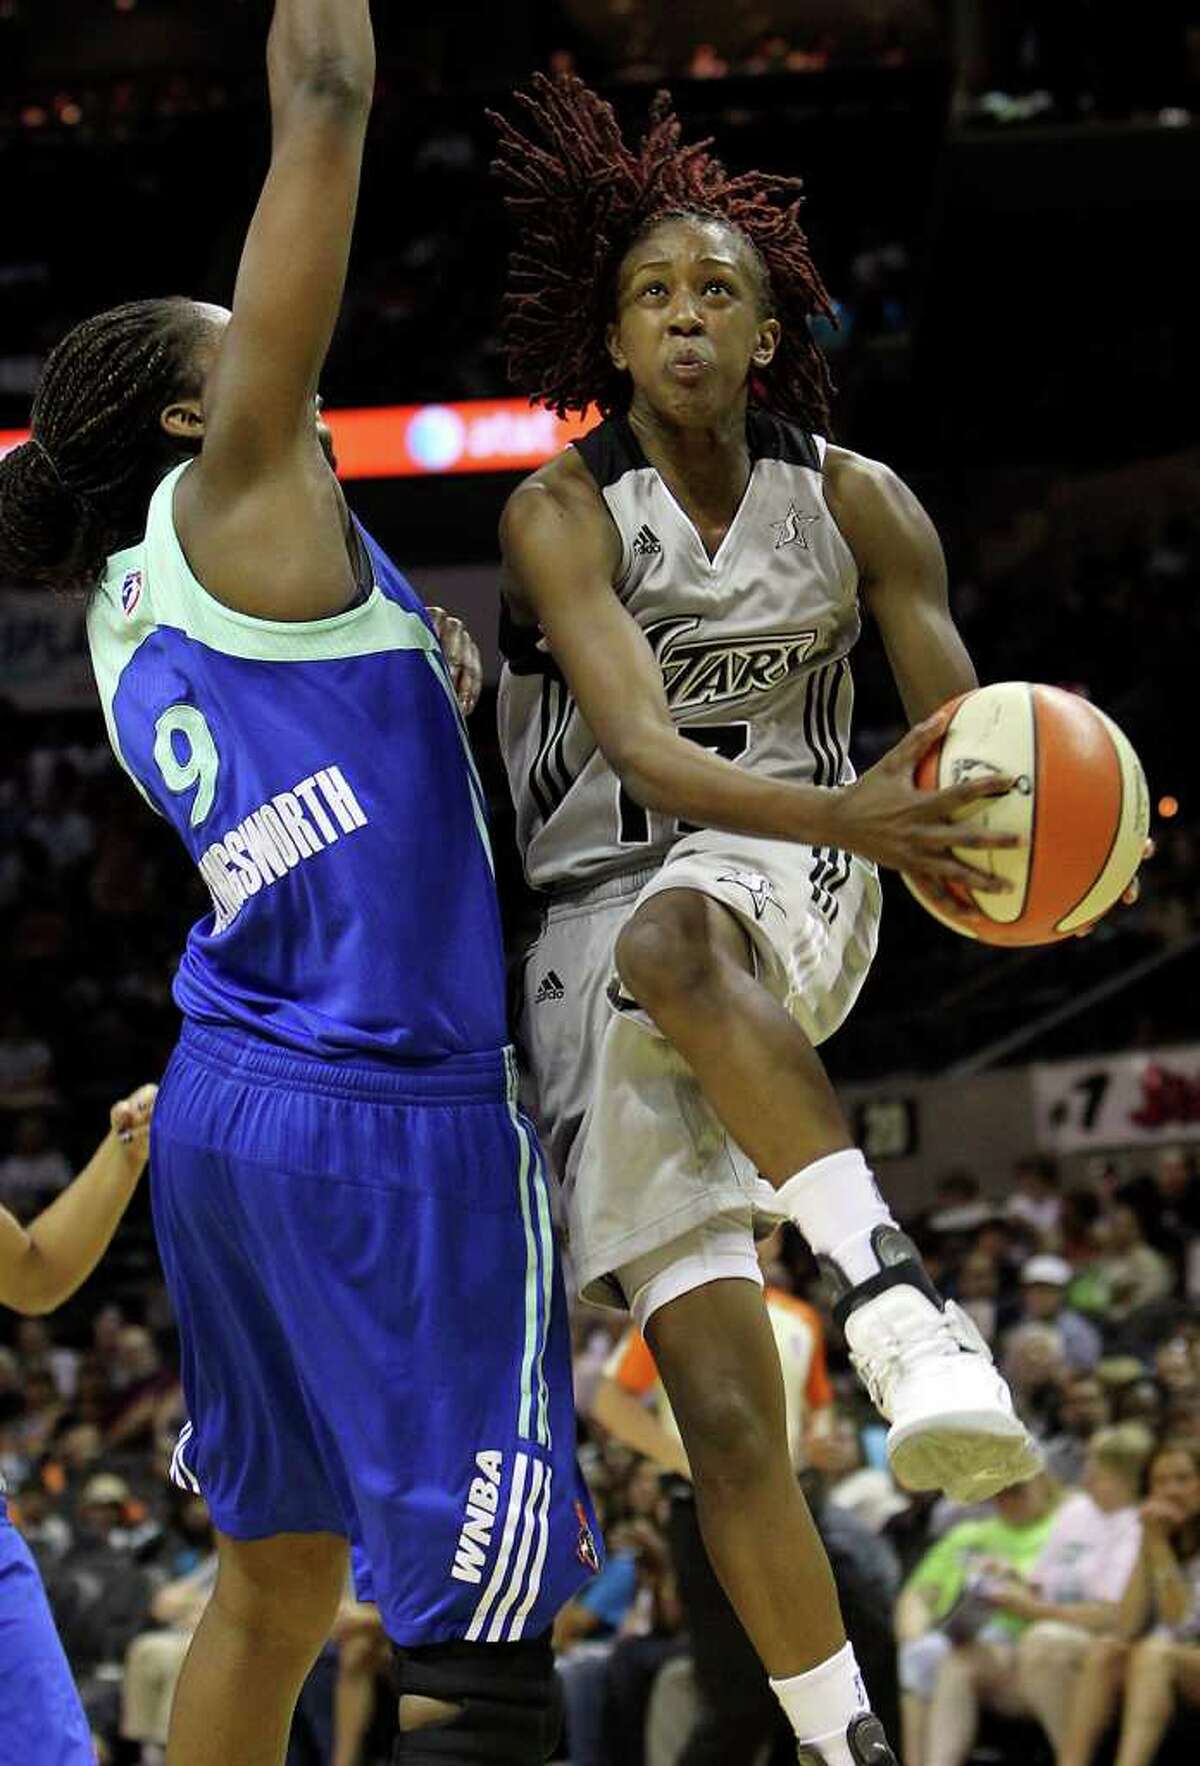 Silver Stars' Danielle Robinson (13) drives to the basket against New York Liberty's Quanitra Hollingsworth (09) in the first half at the AT&T Center on Friday, July 8, 2011. Kin Man Hui/kmhui@express-news.net